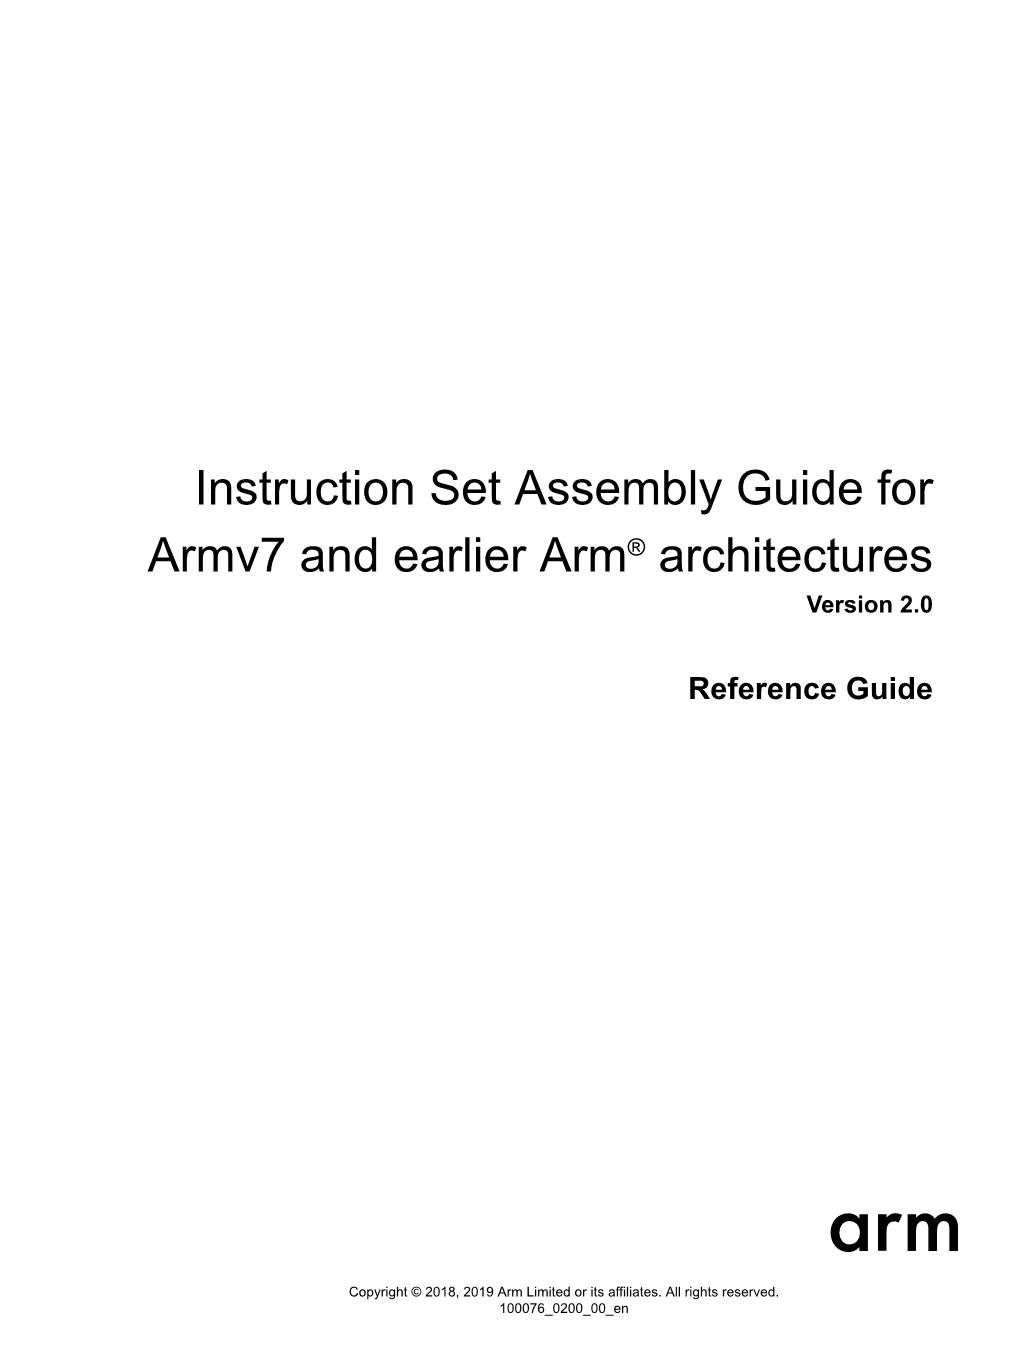 Instruction Set Assembly Guide for Armv7 and Earlier Arm® Architectures Version 2.0